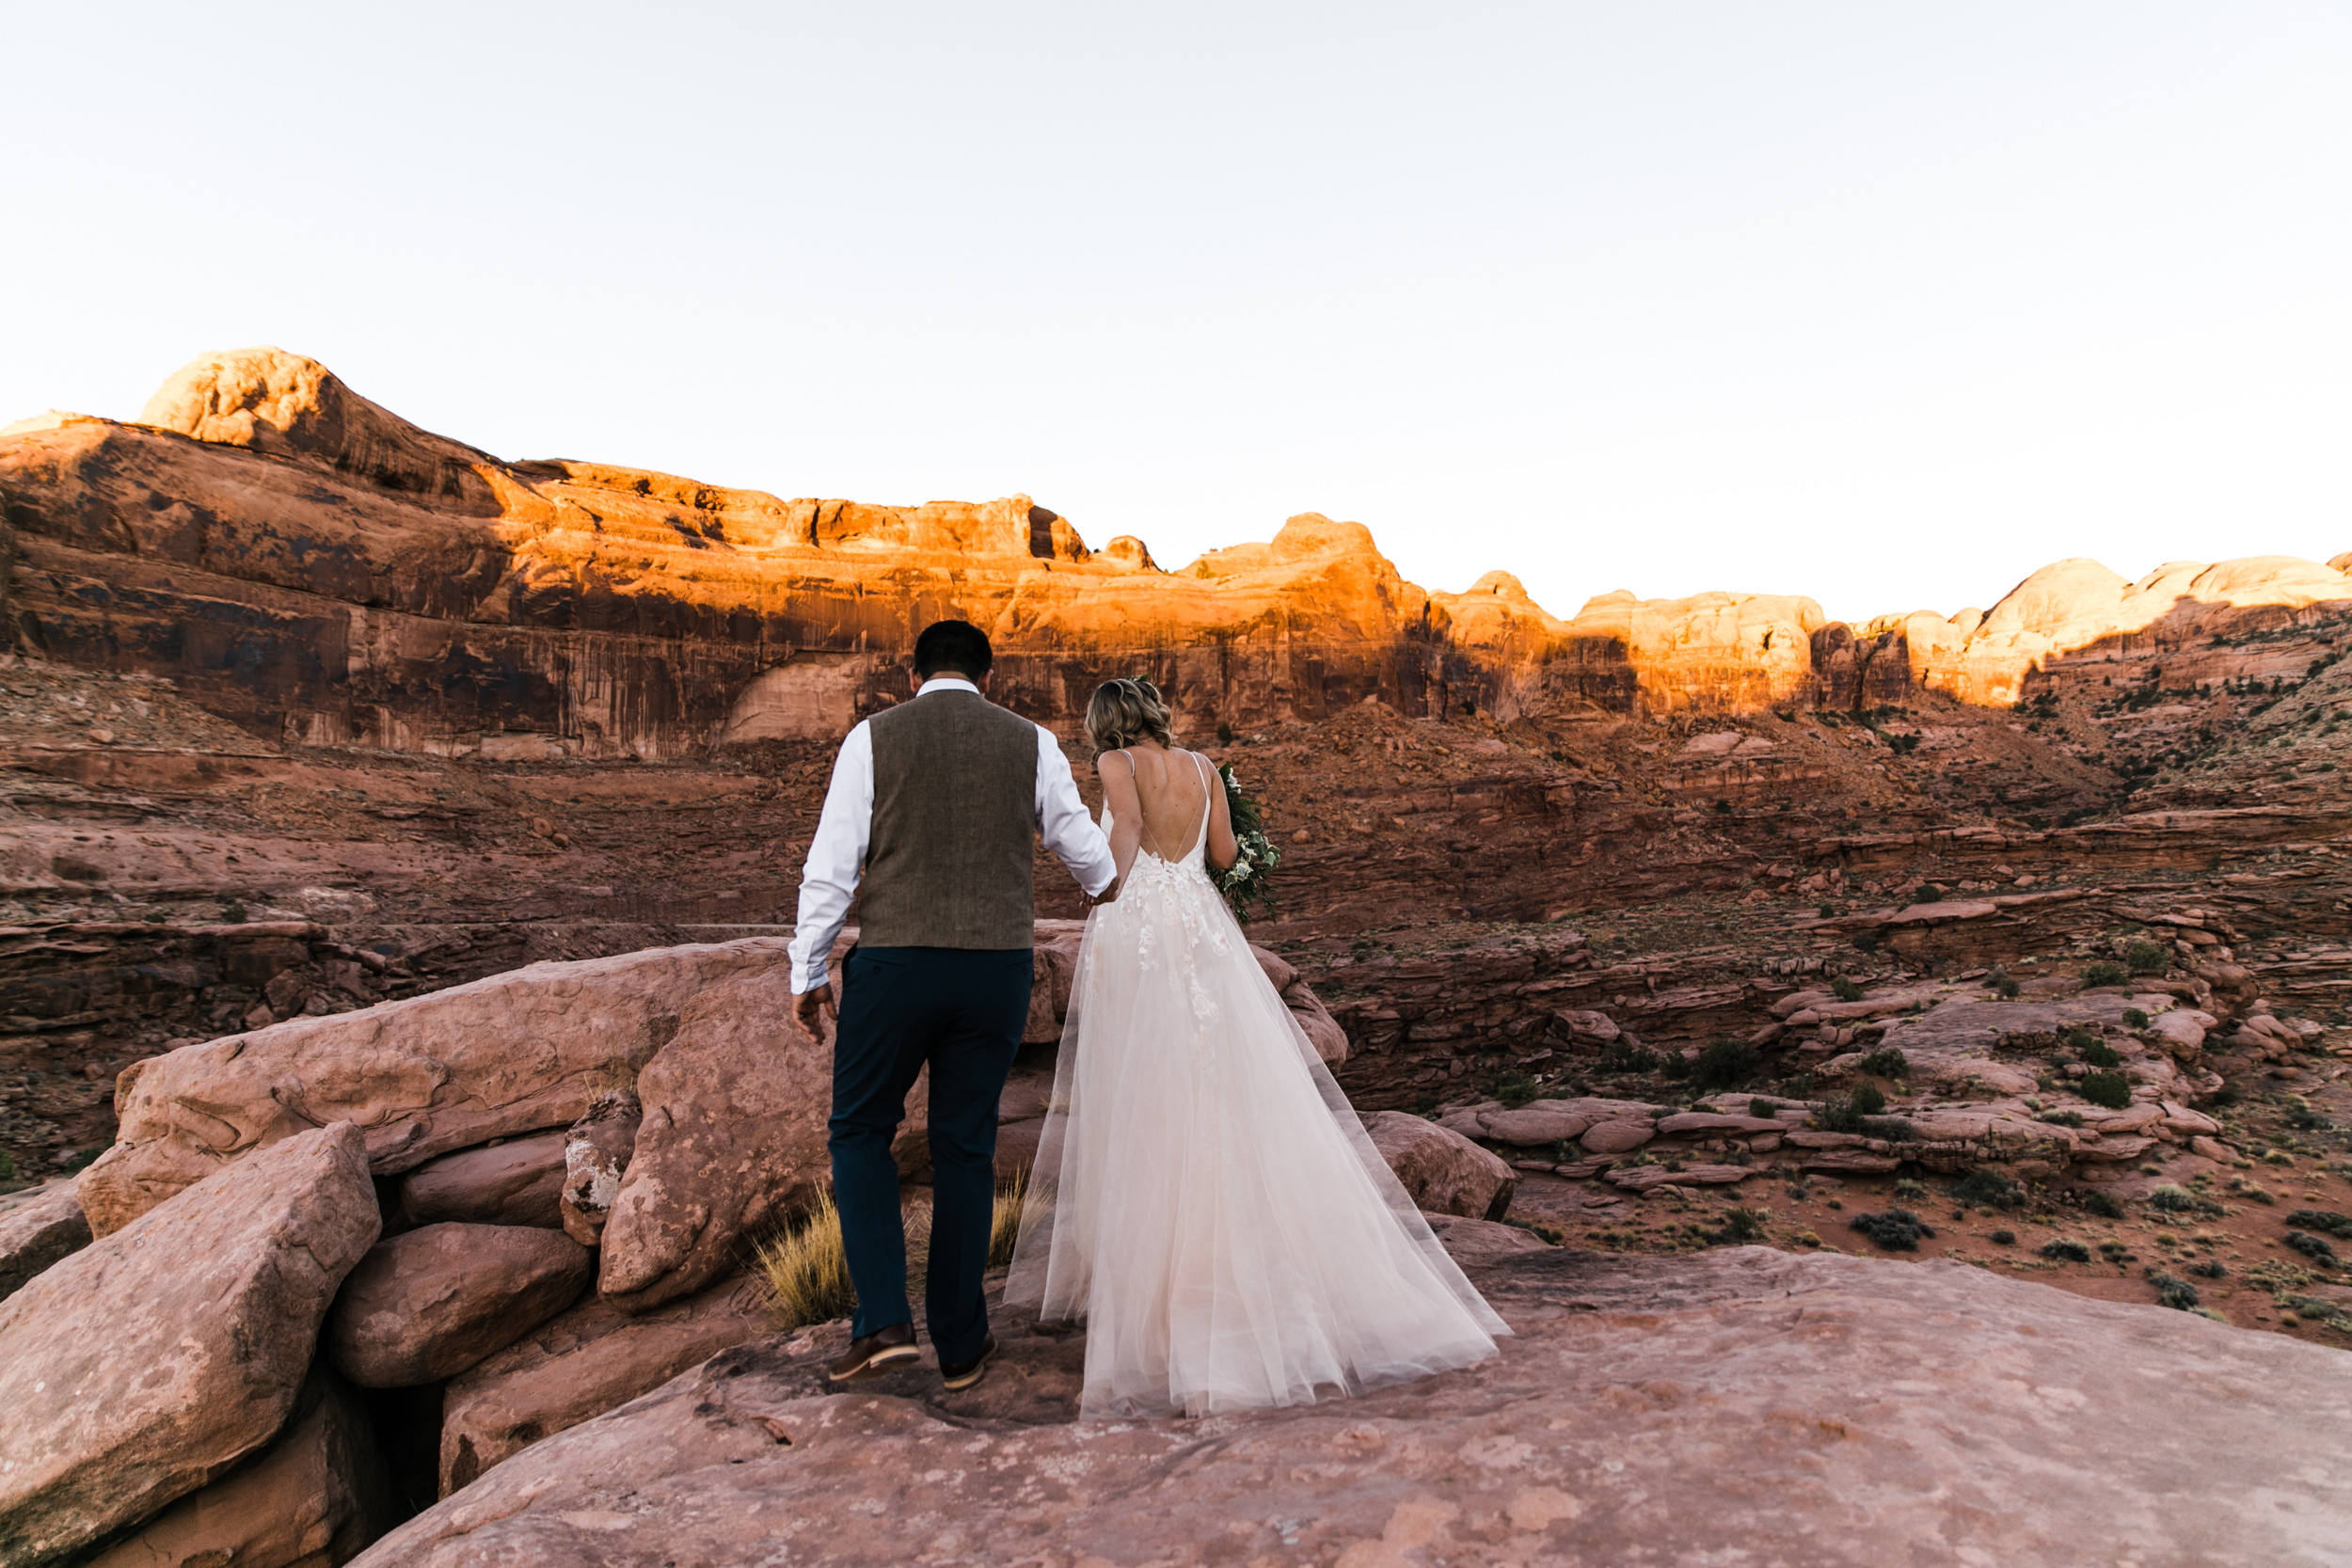 intimate elopement in a secret canyon near moab, utah | moab elopement photographer | the hearnes adventure photography